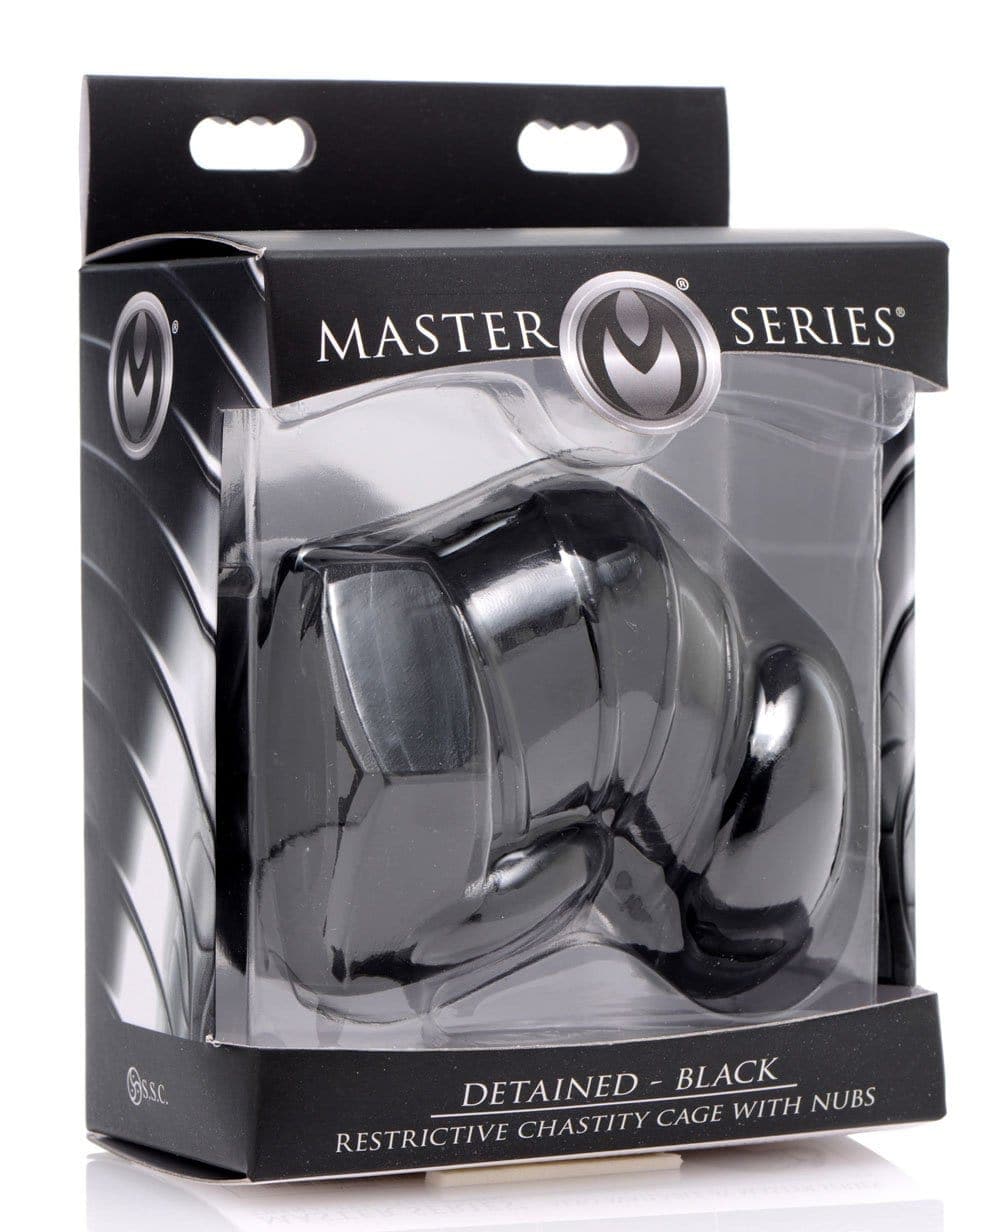 master series detained black restrictive chastity cage